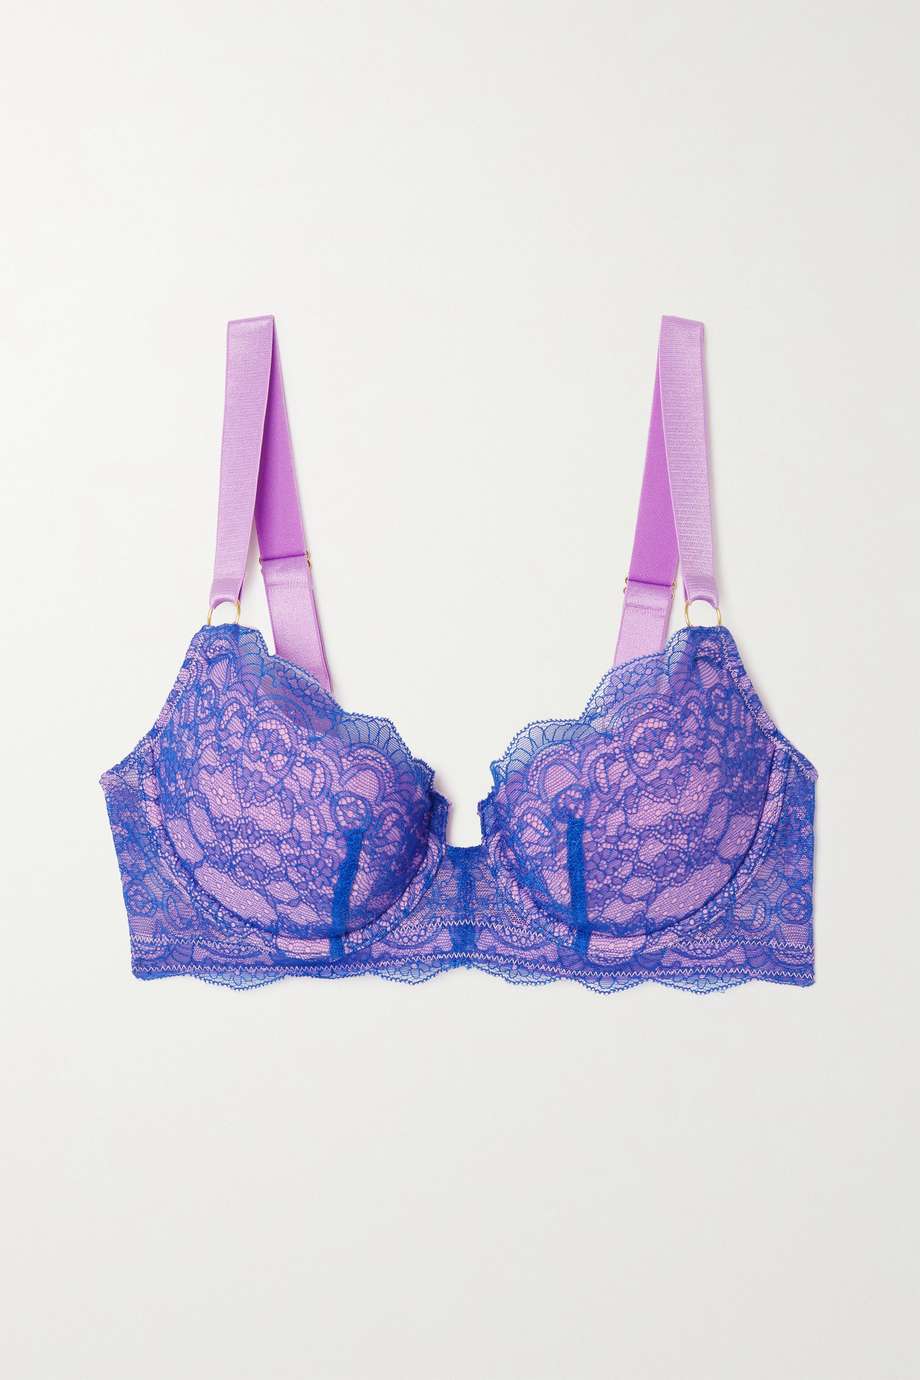 8 Lingerie Brands With the Very Best Bras | Who What Wear UK